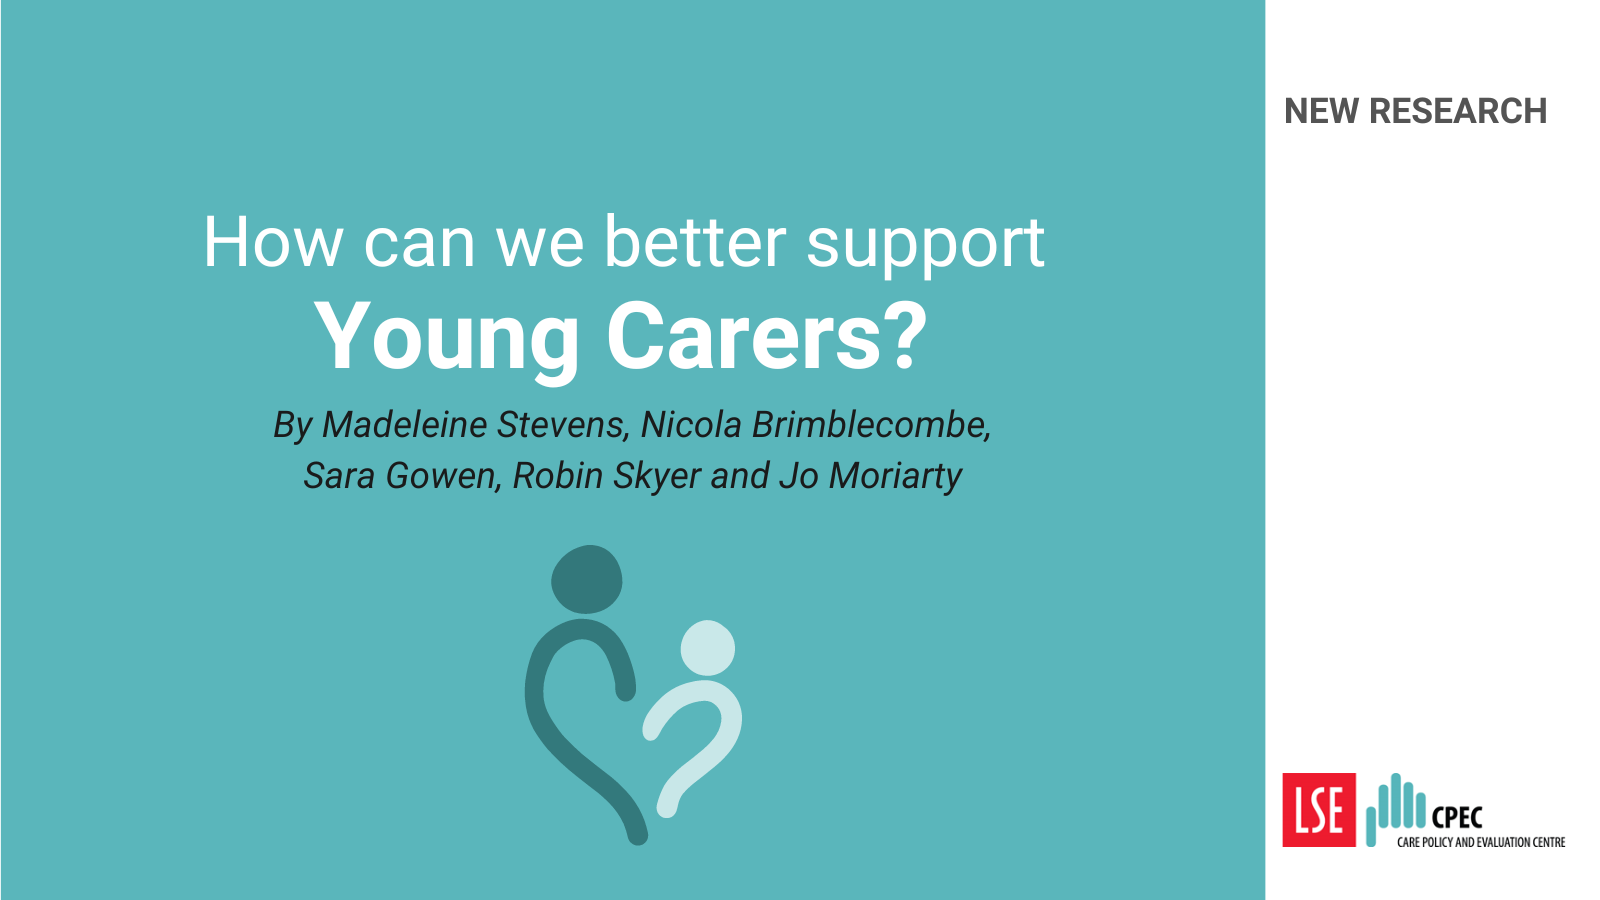 How can we better support young carers